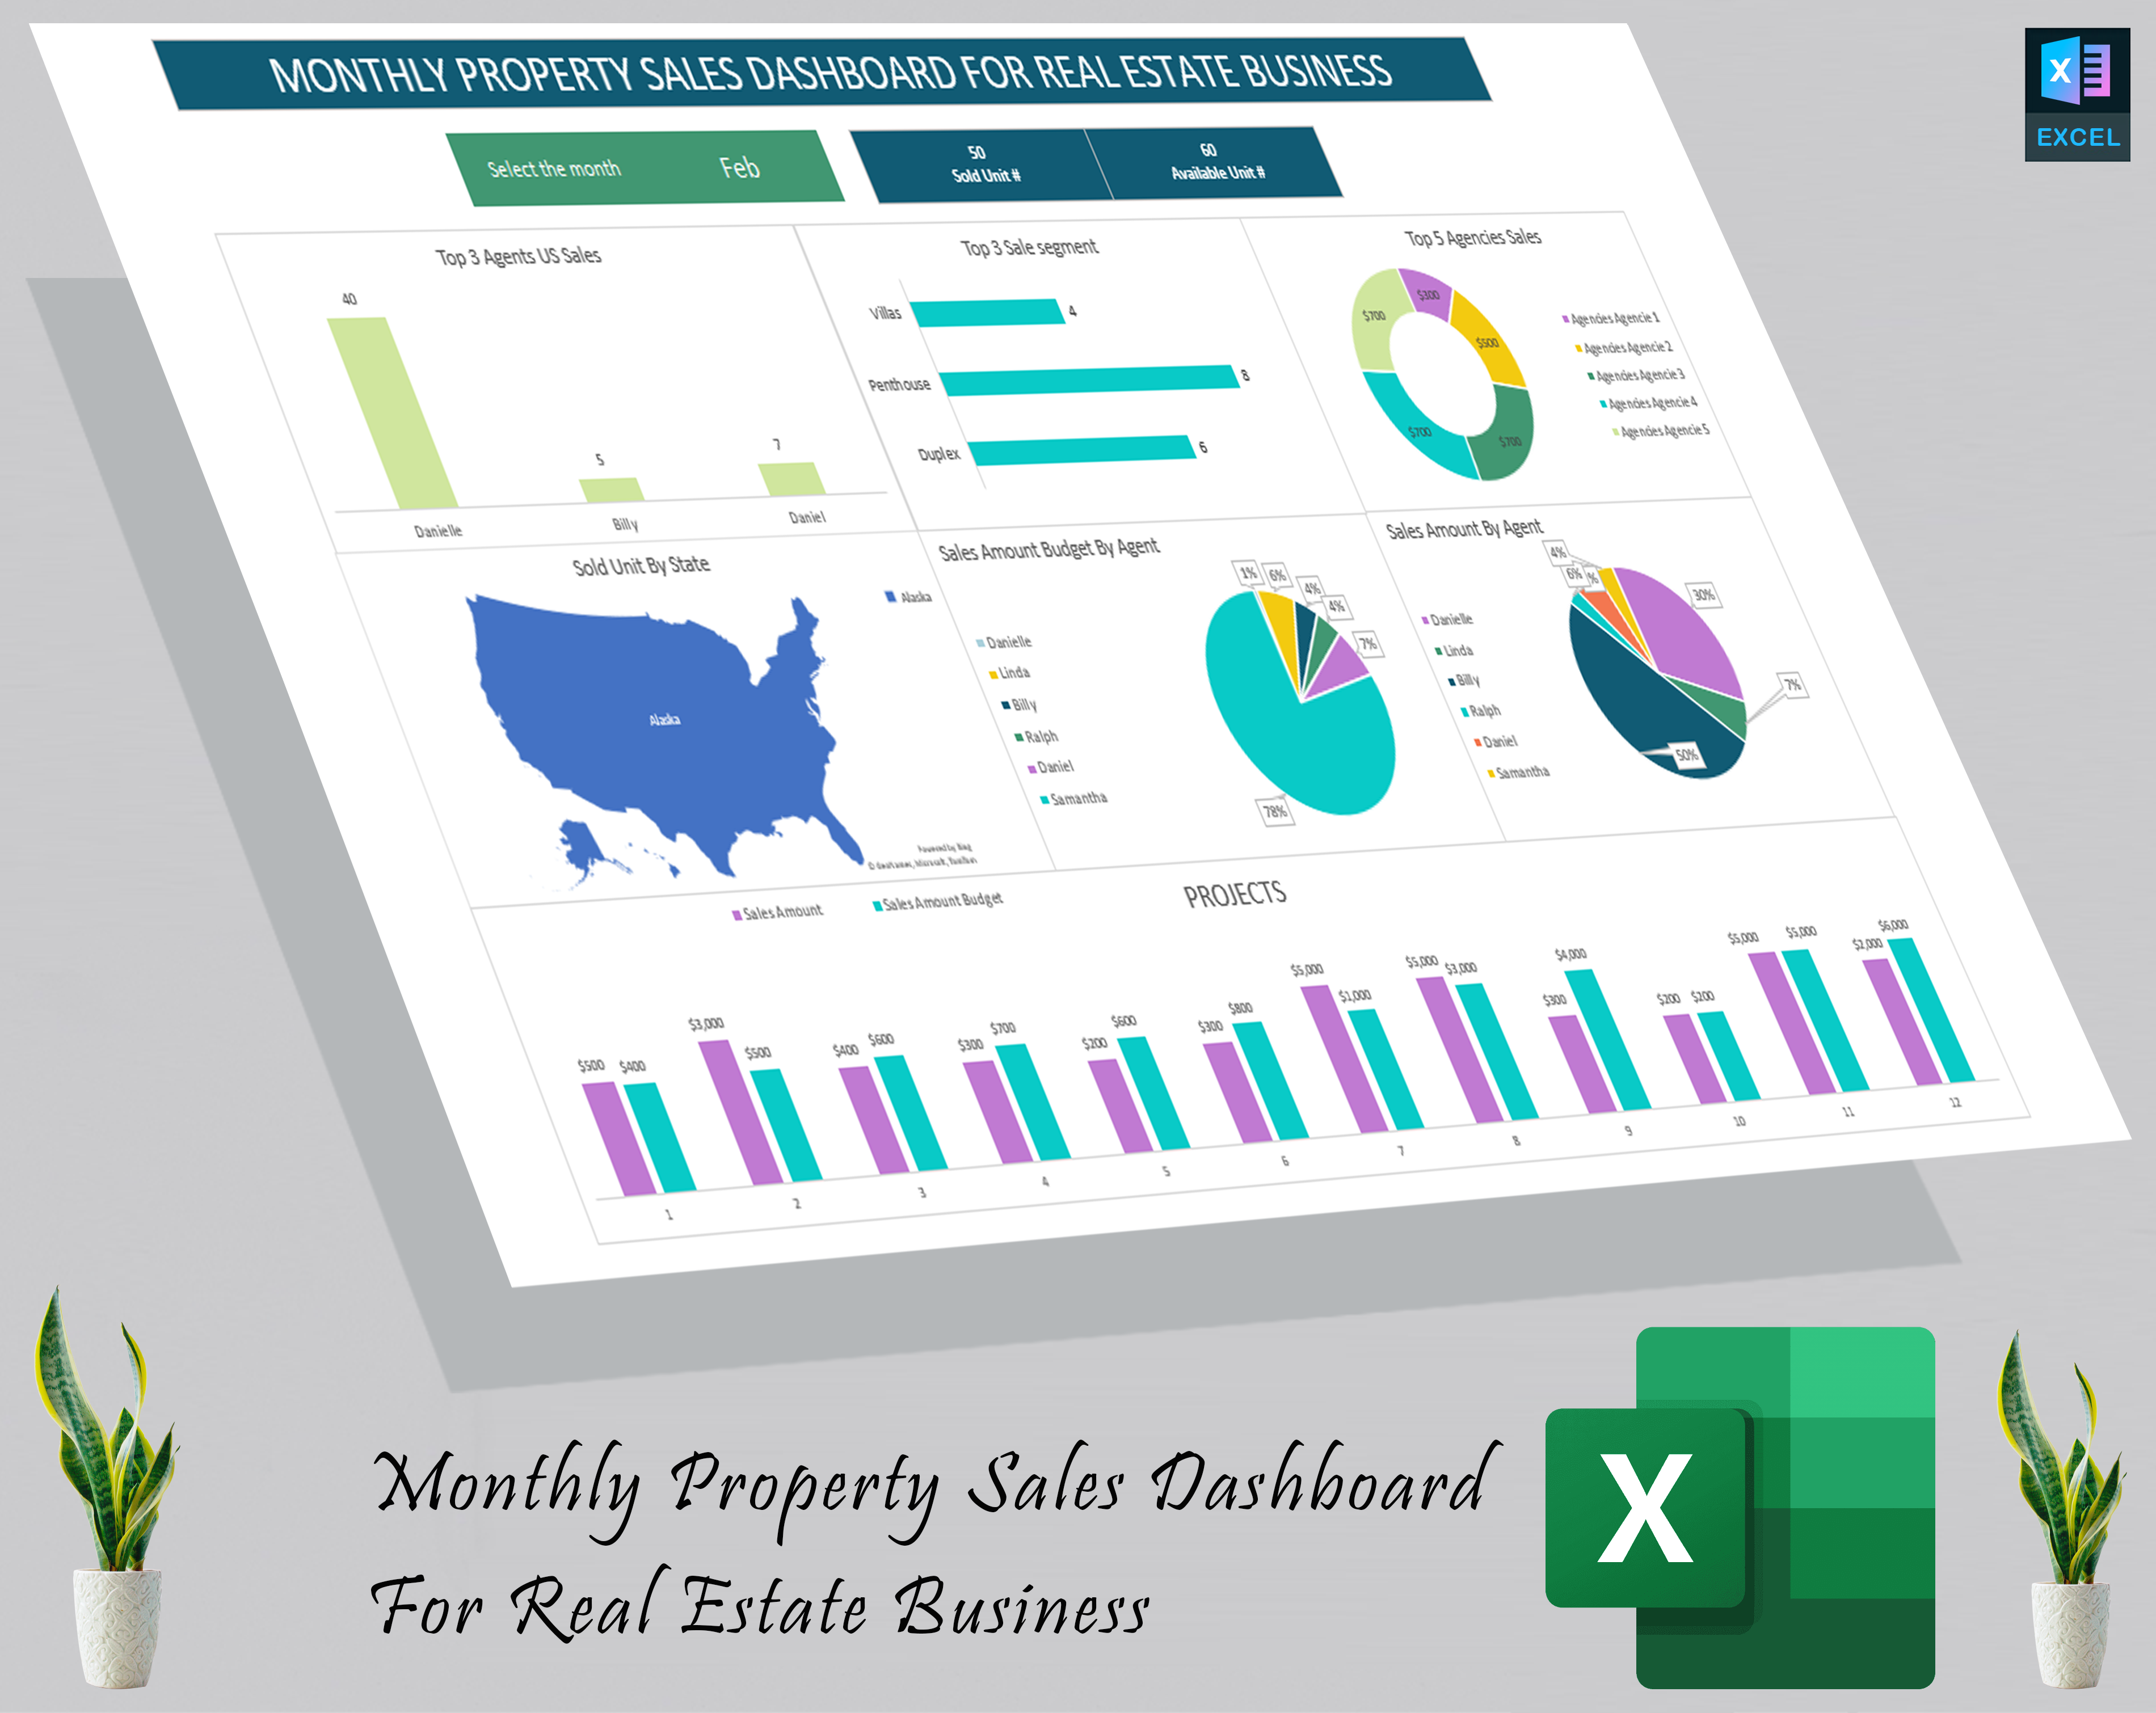 Monthly properties sales dashboard for real estate business